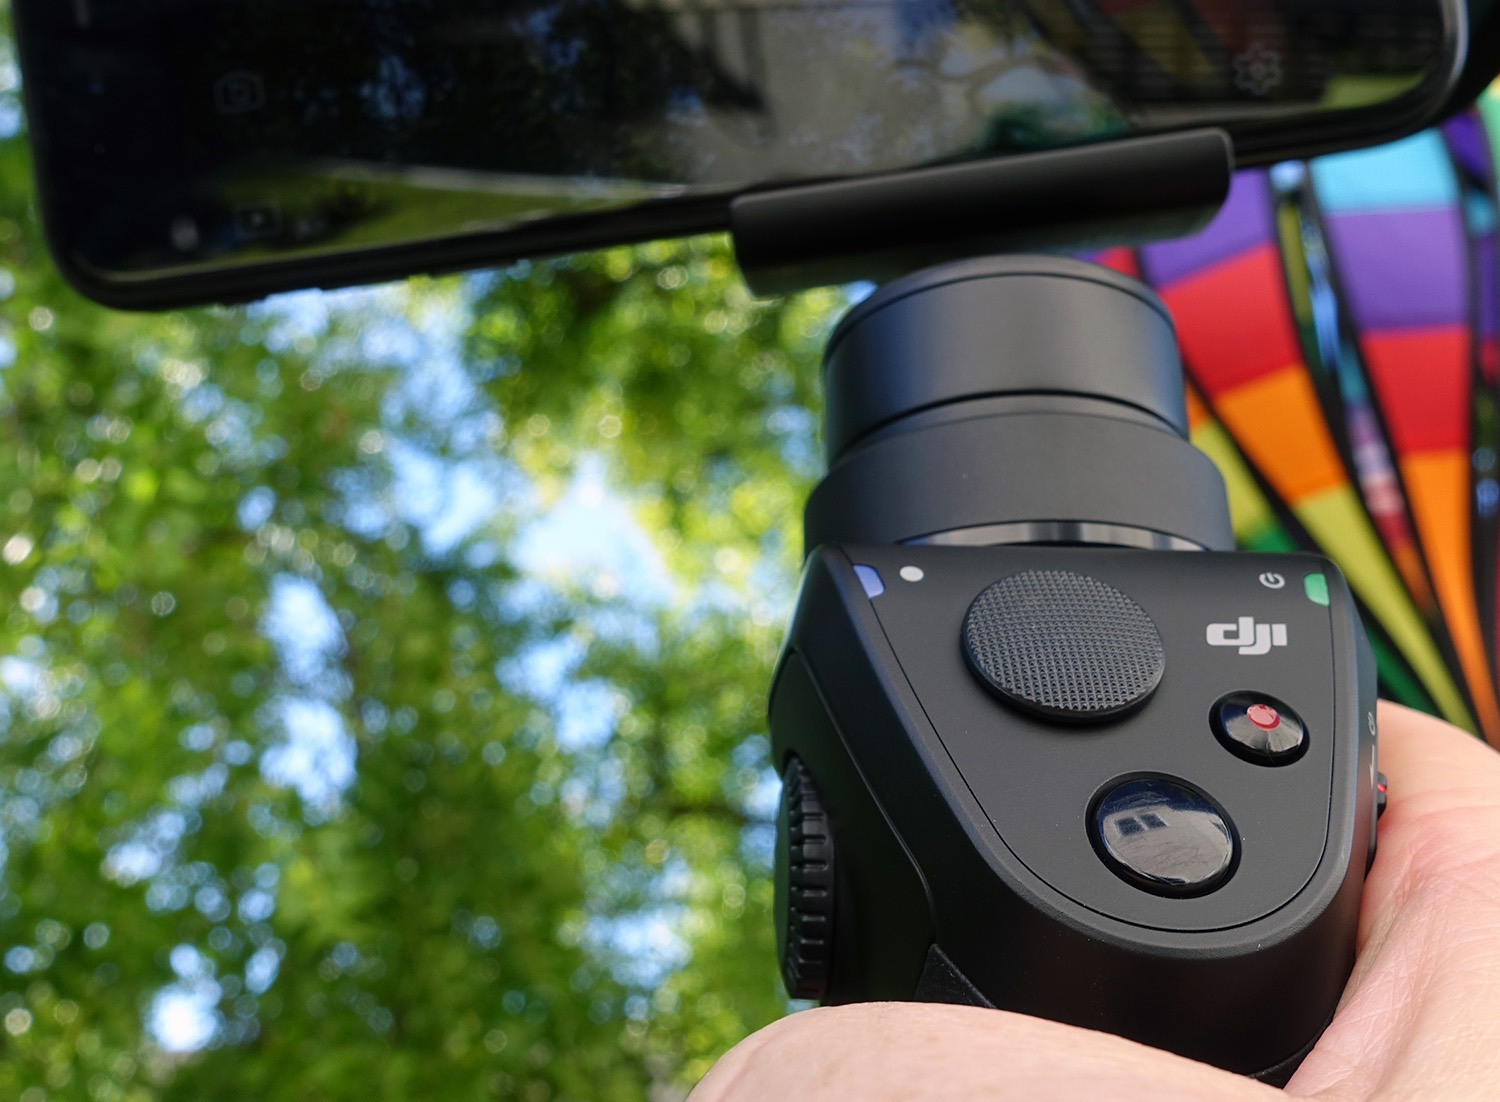 DJI Osmo Mobile Review controls